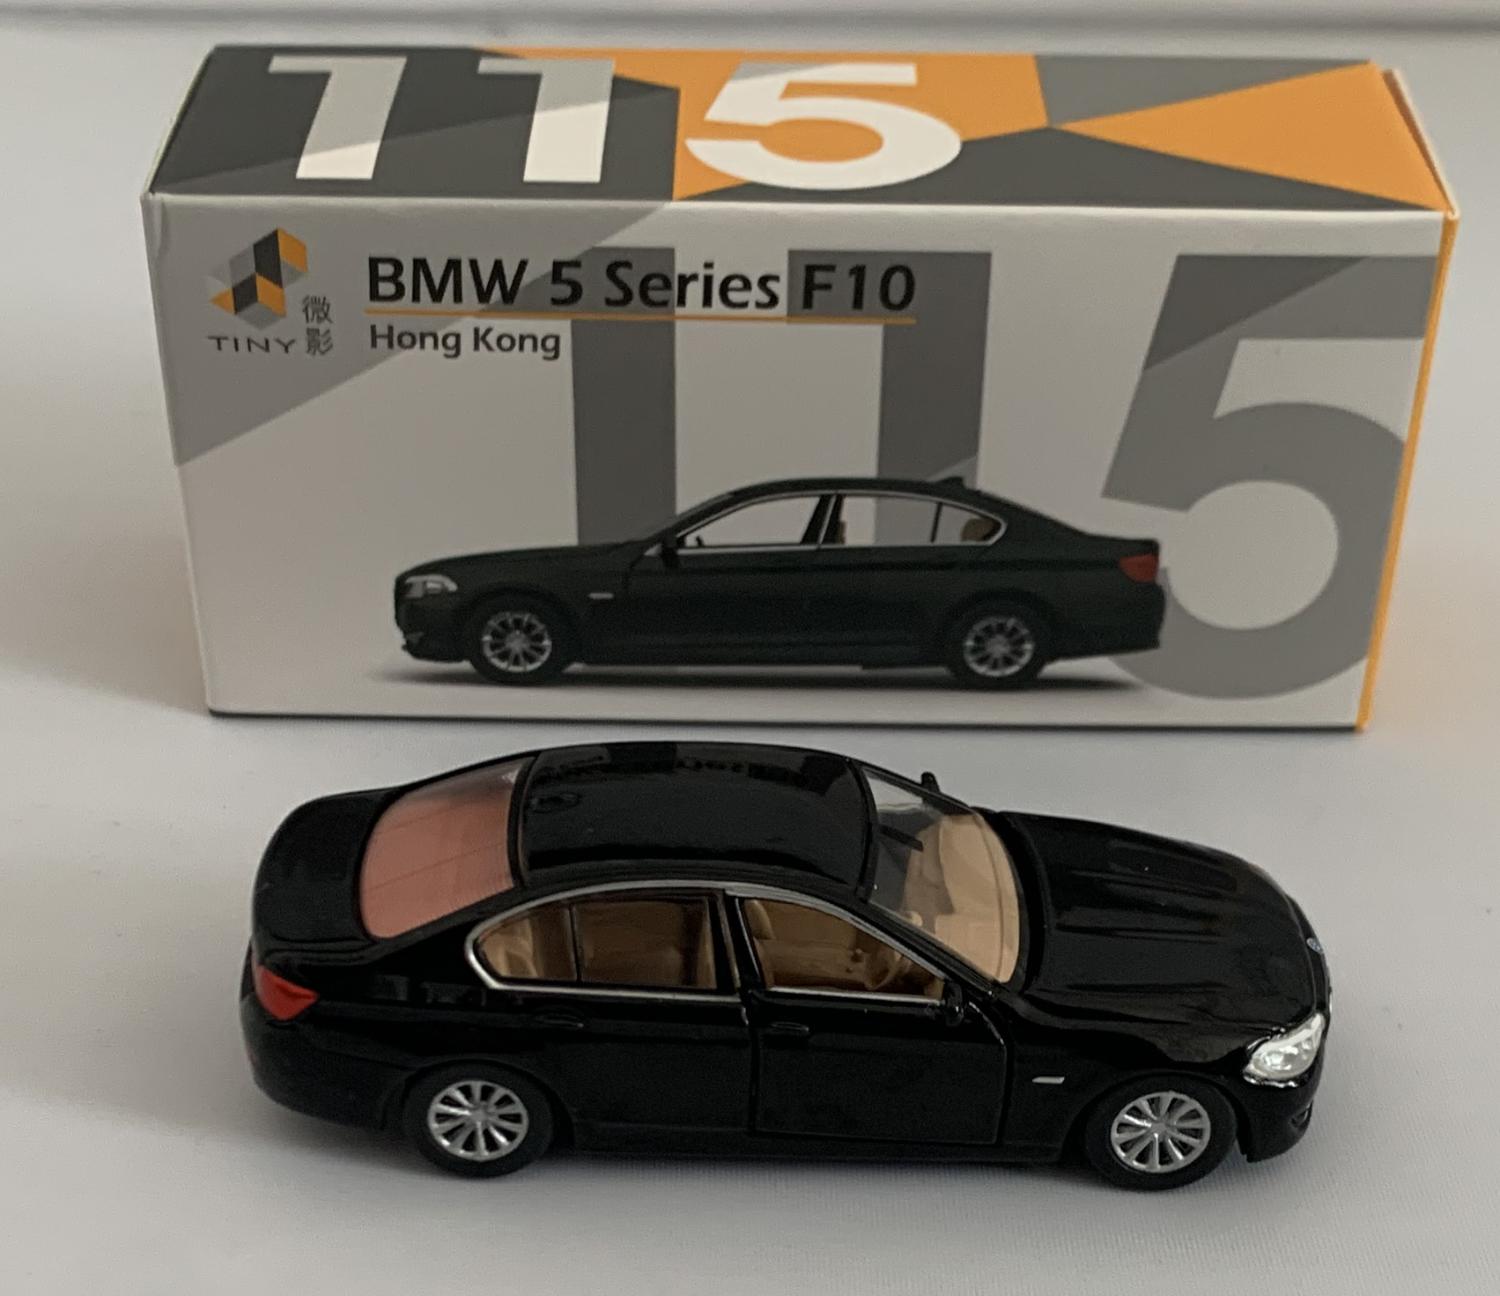 A good reproduction of the BMW 5 Series with detail throughout, all authentically recreated.  The model is presented in a box, the car is approx. 7.5 cm long and the box is 10 cm long